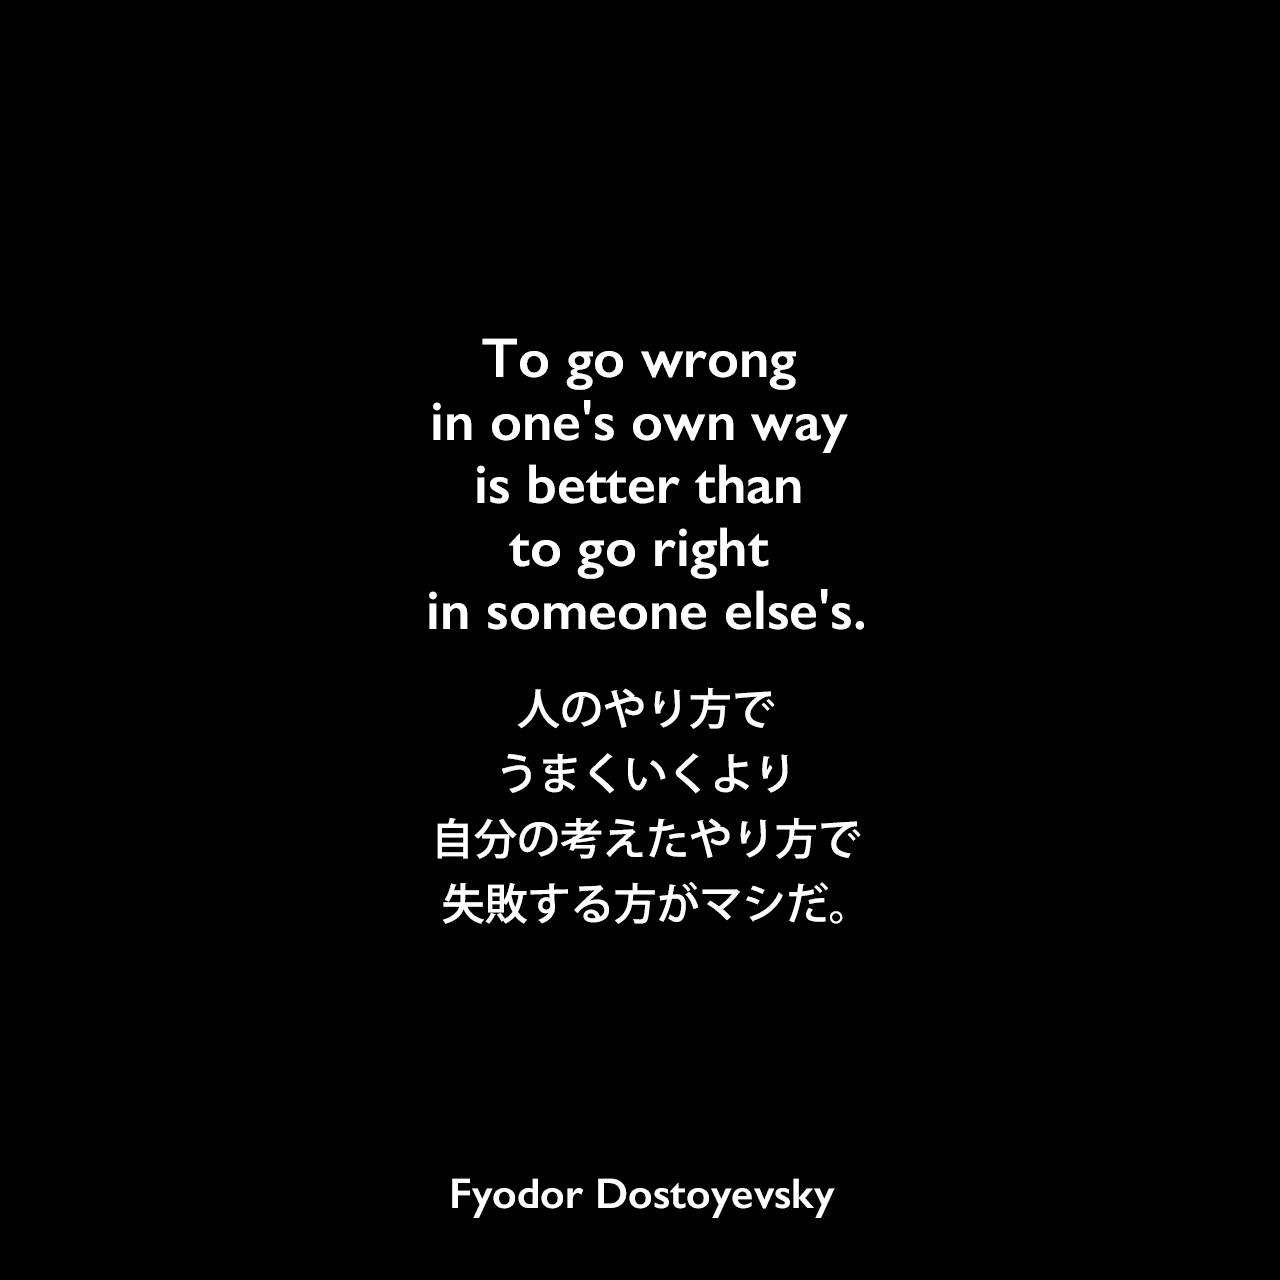 To go wrong in one's own way is better than to go right in someone else's.人のやり方でうまくいくより自分の考えたやり方で失敗する方がマシだ。Fyodor Dostoyevsky